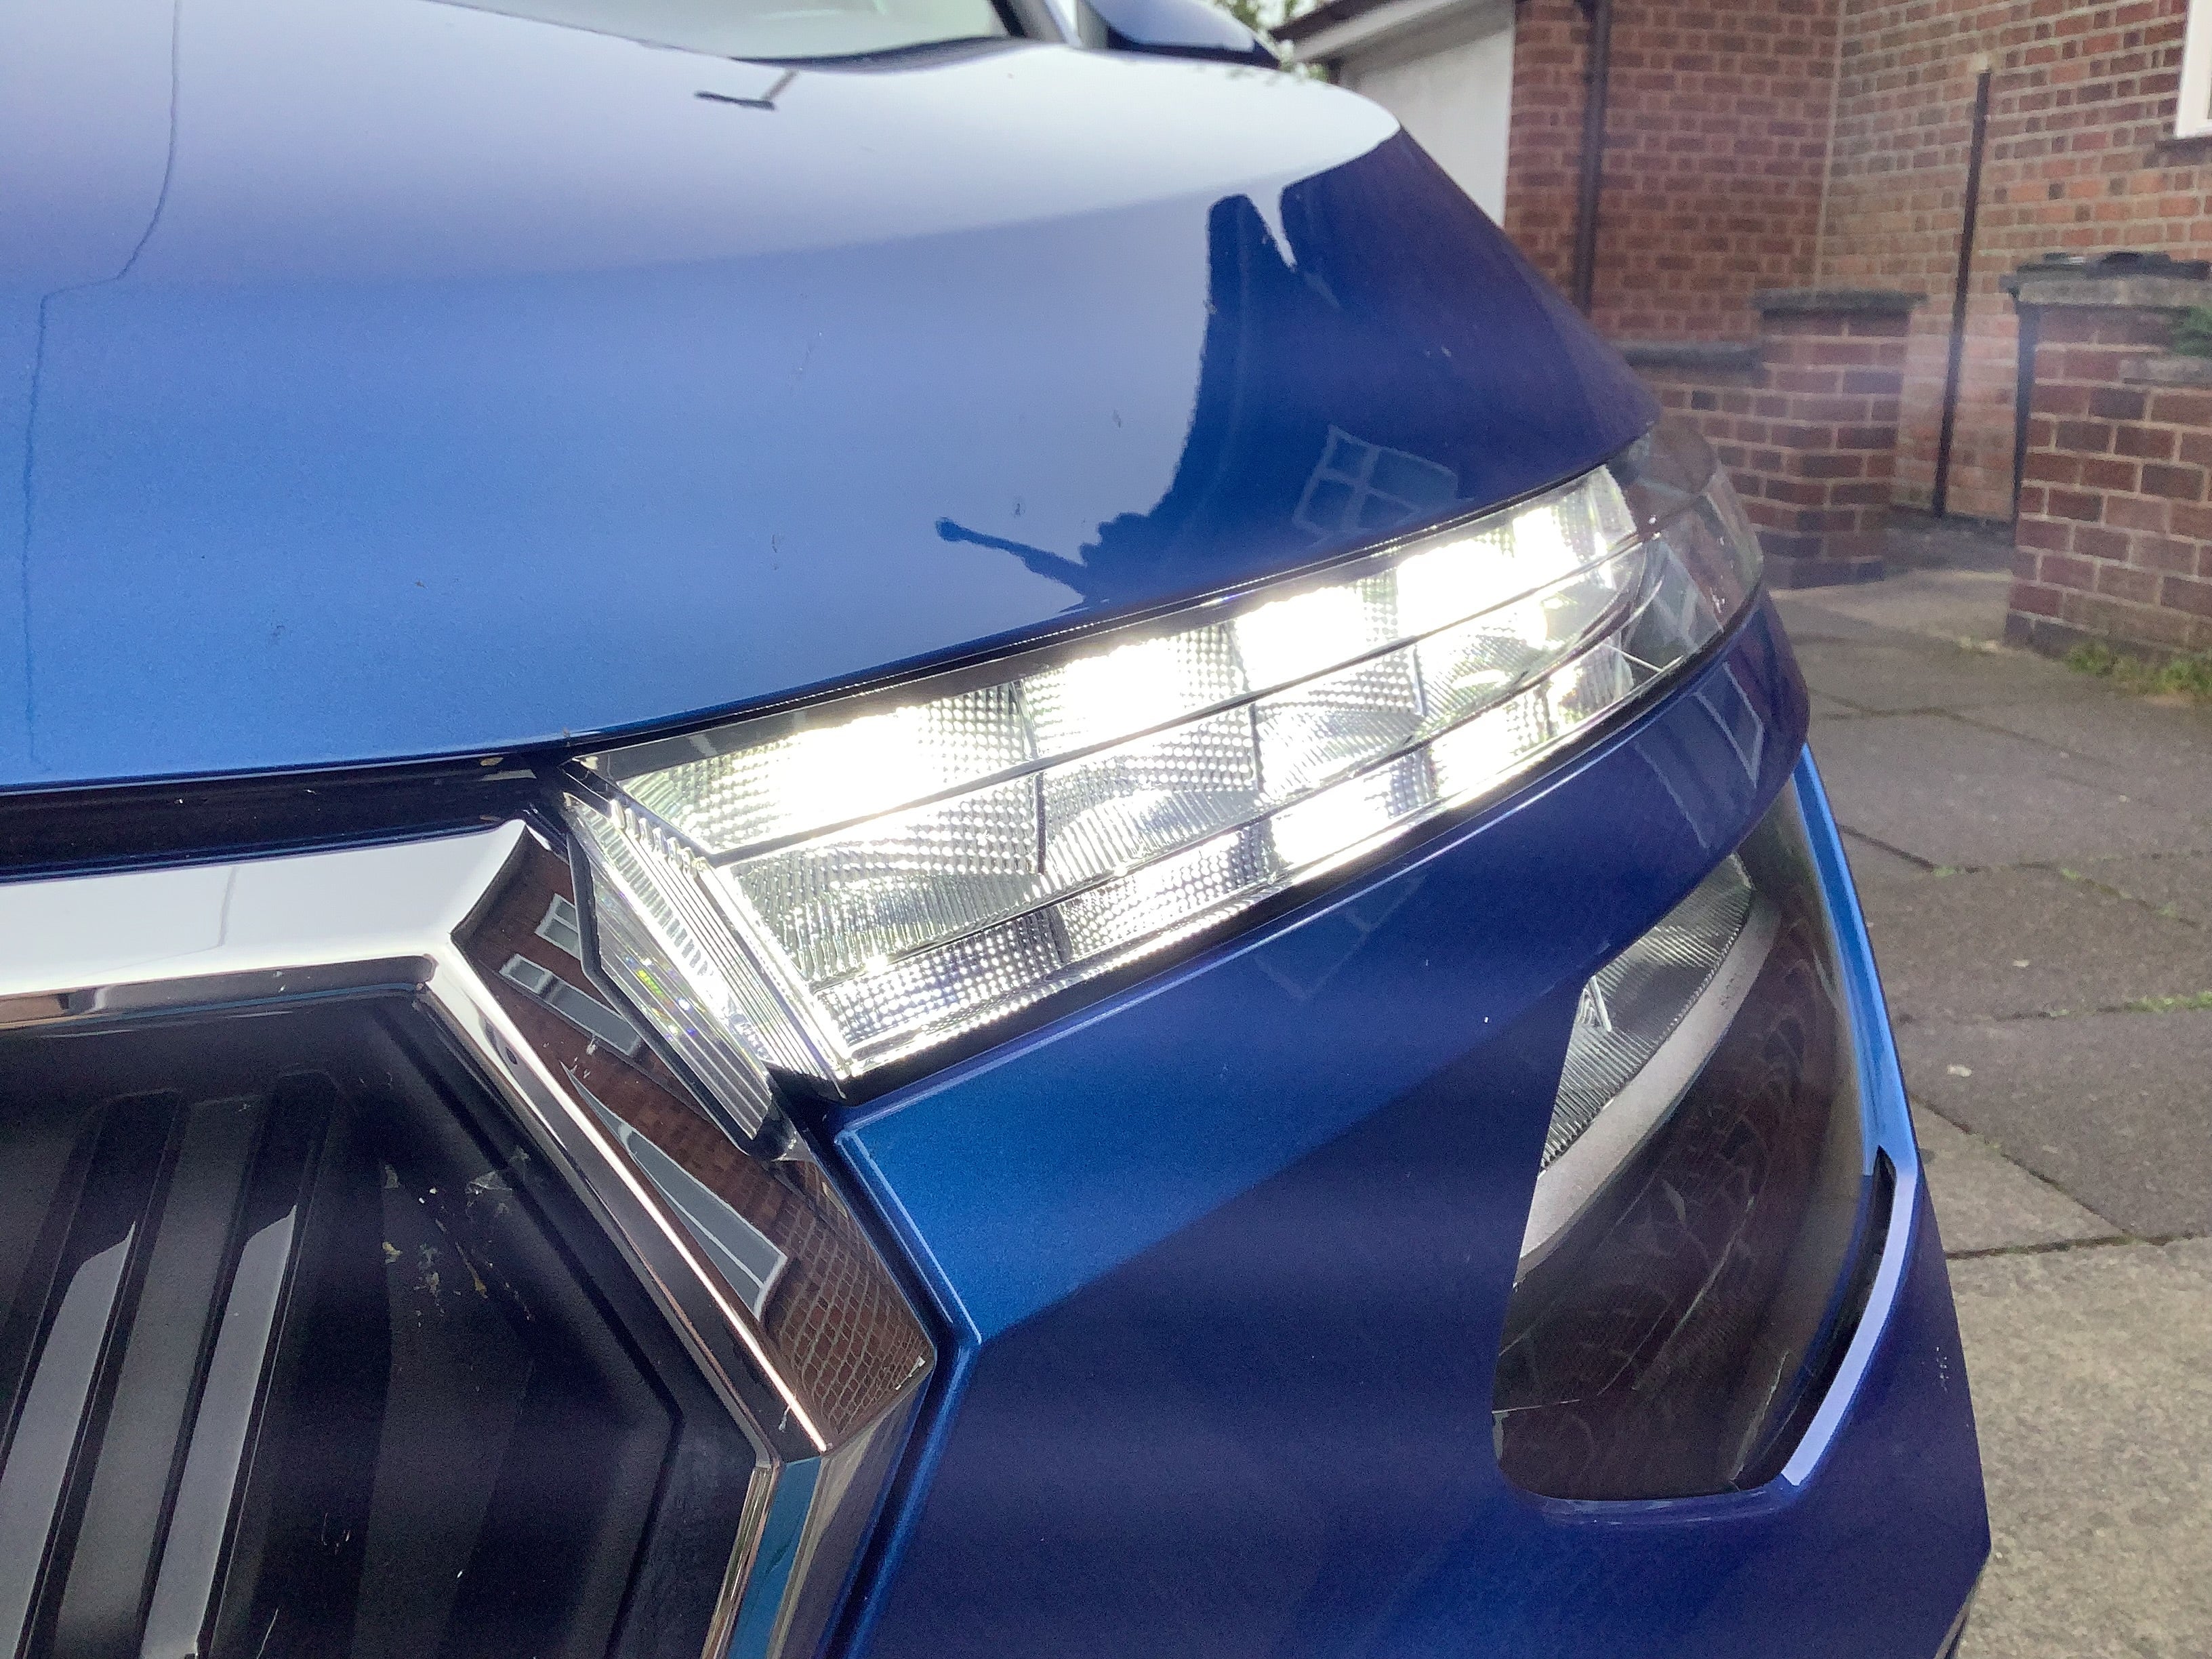 The SE L model has two-tier LED front lights and dynamic indicators